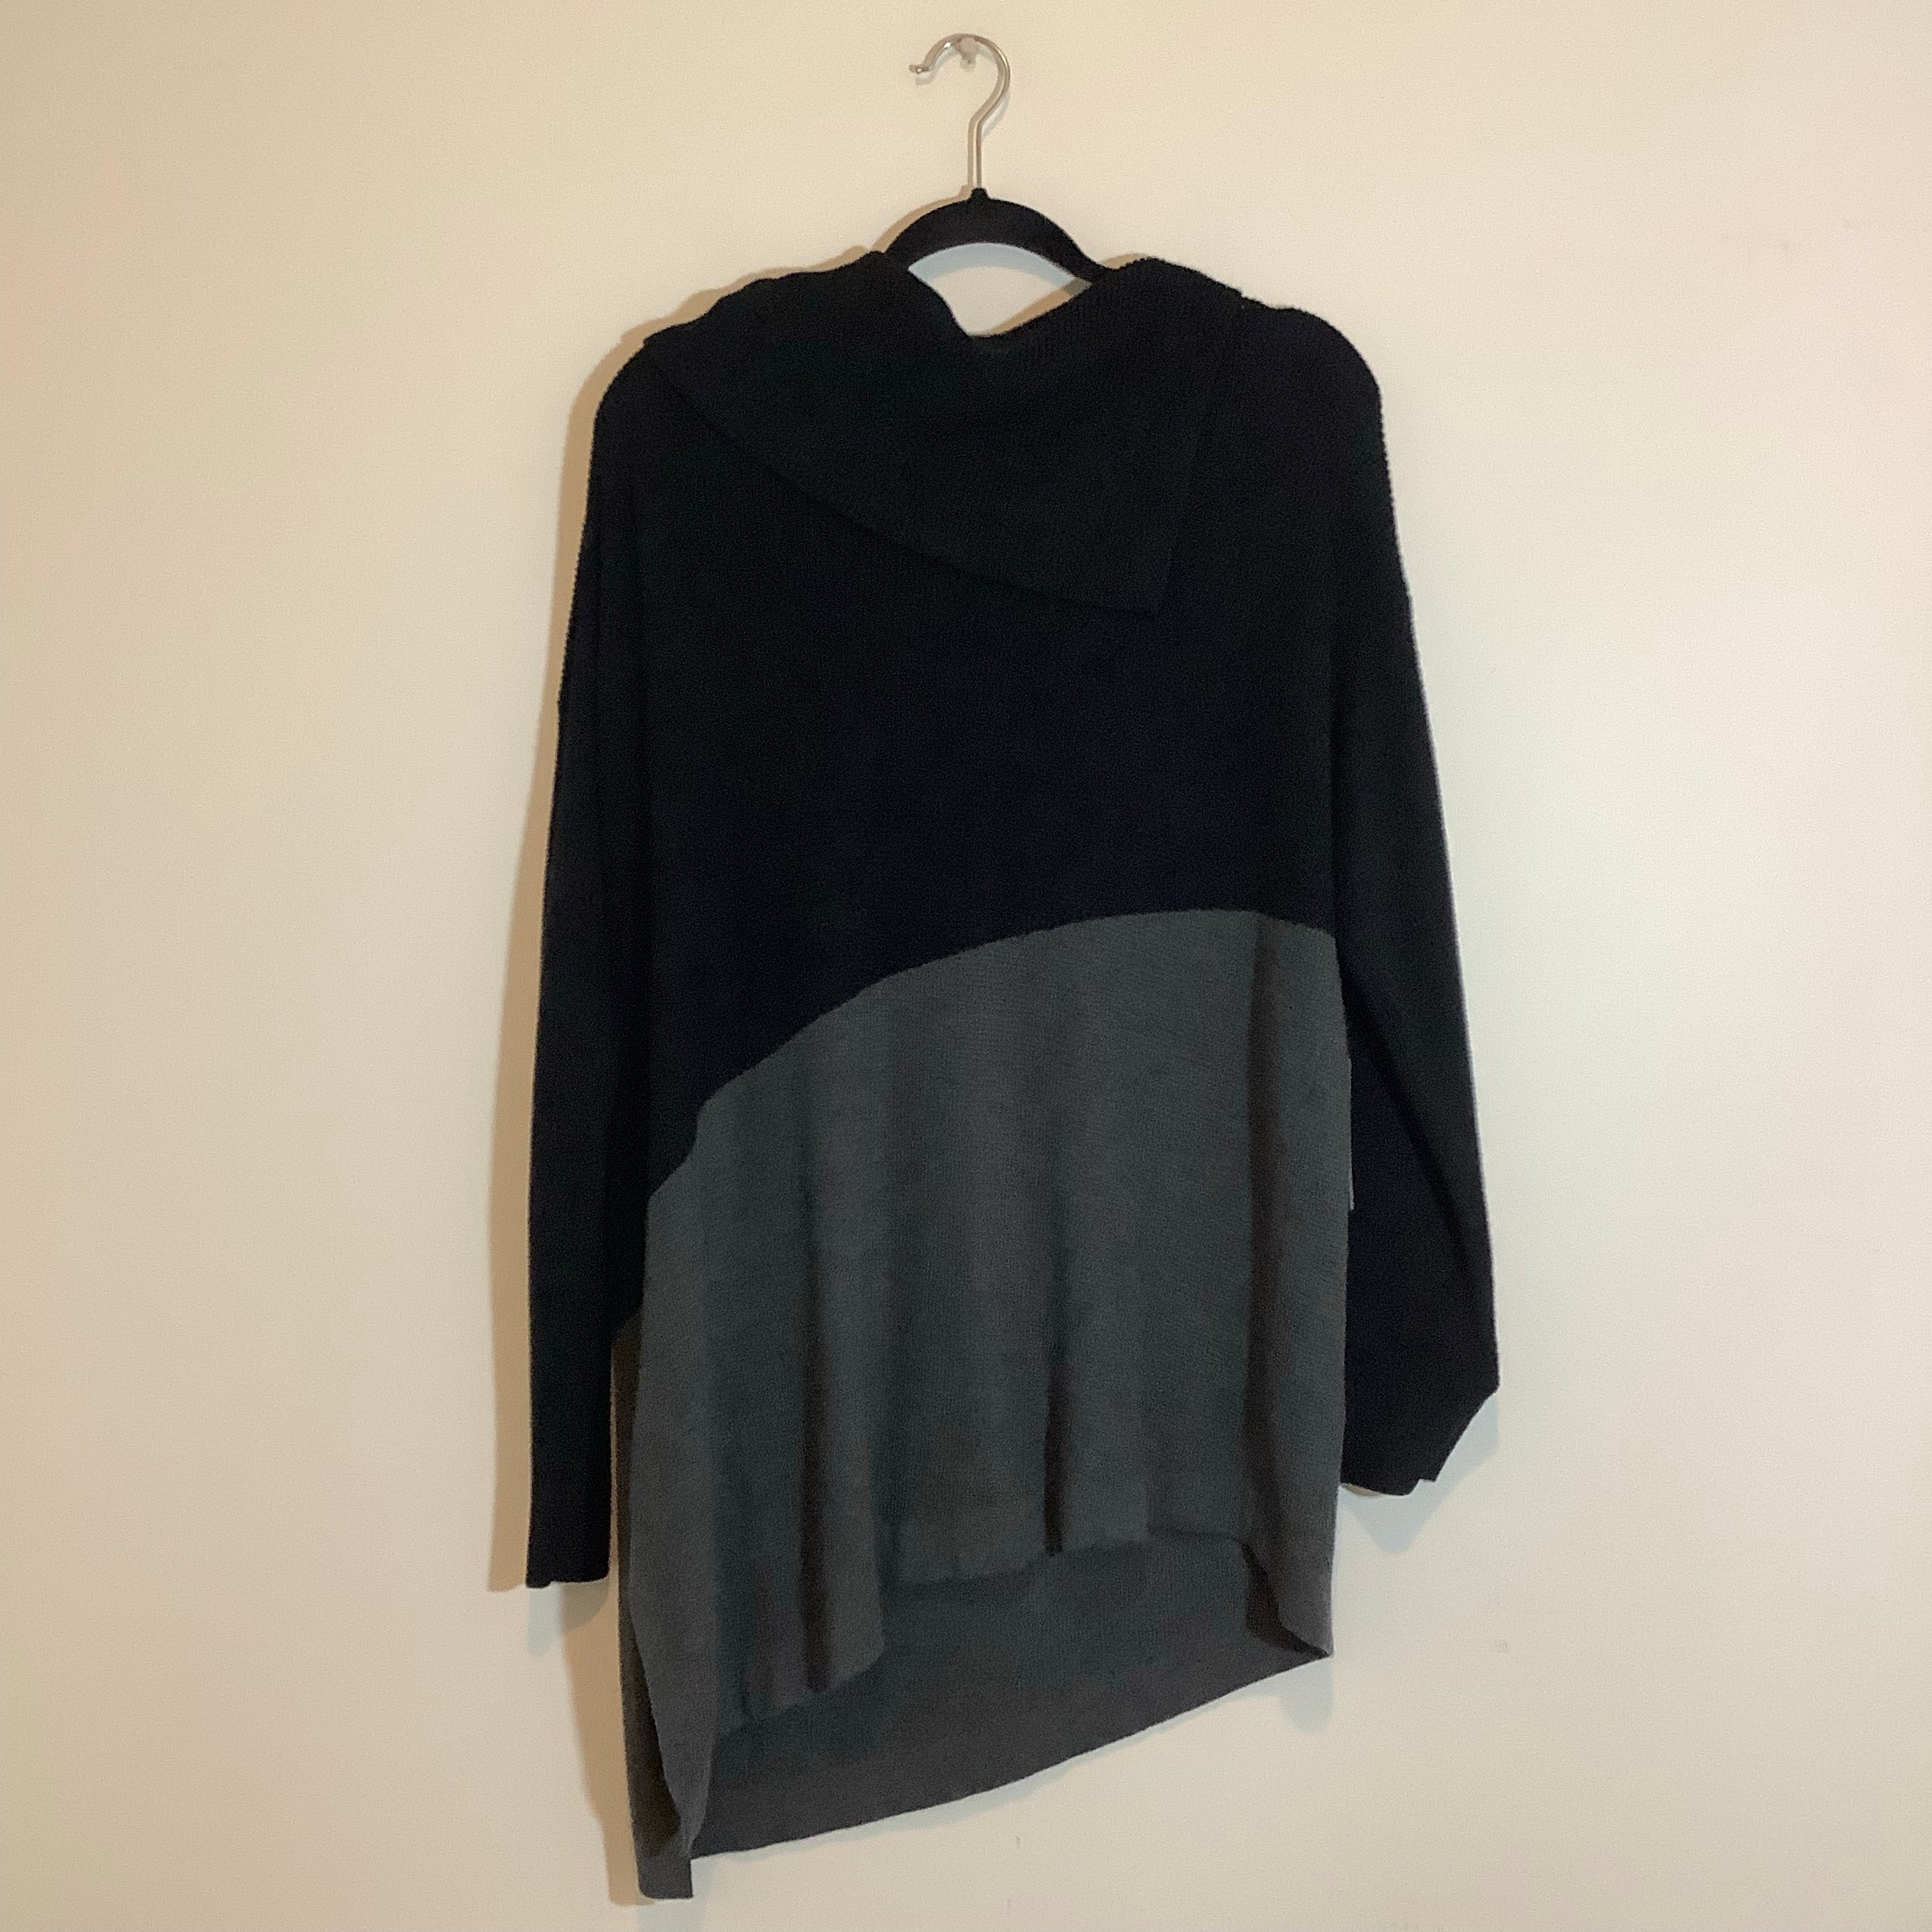 Vince Camuto Black Sweater Size 2X NWT